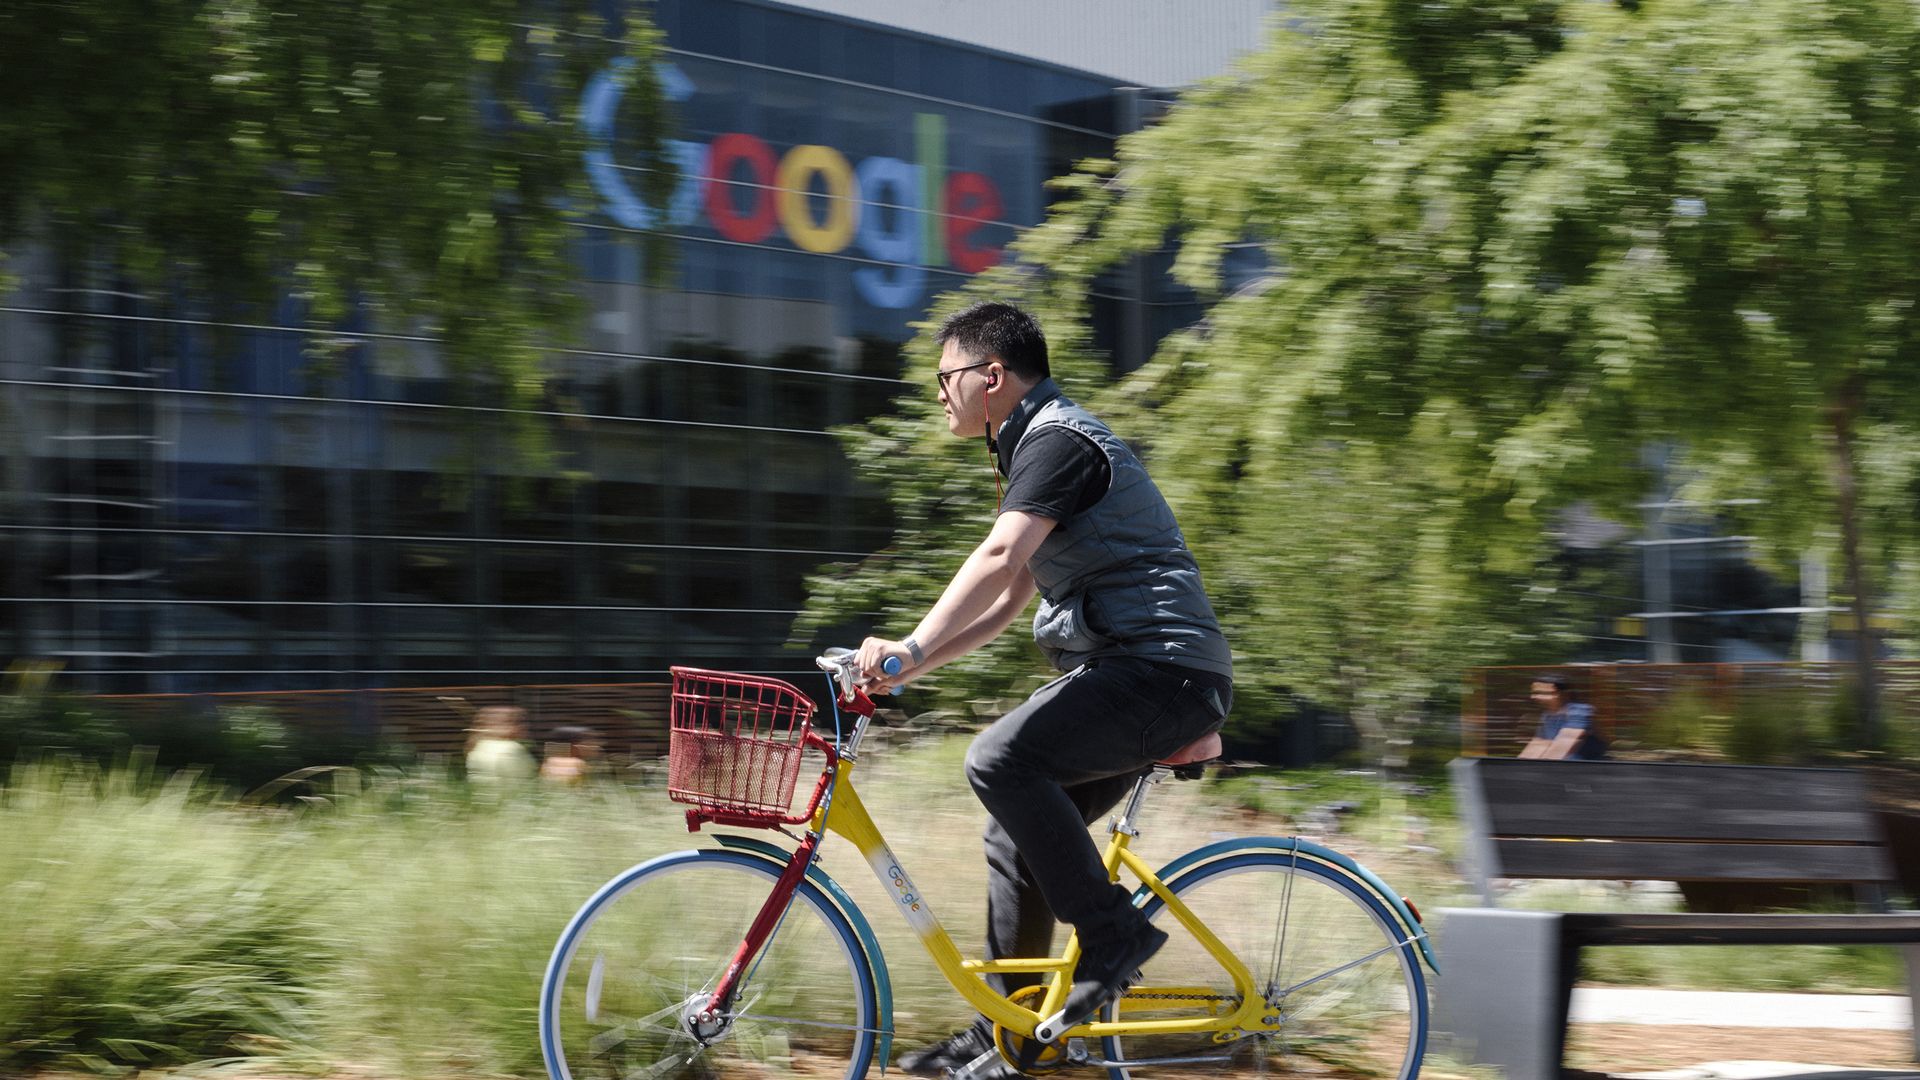 Bicyclist outside Google HQ.